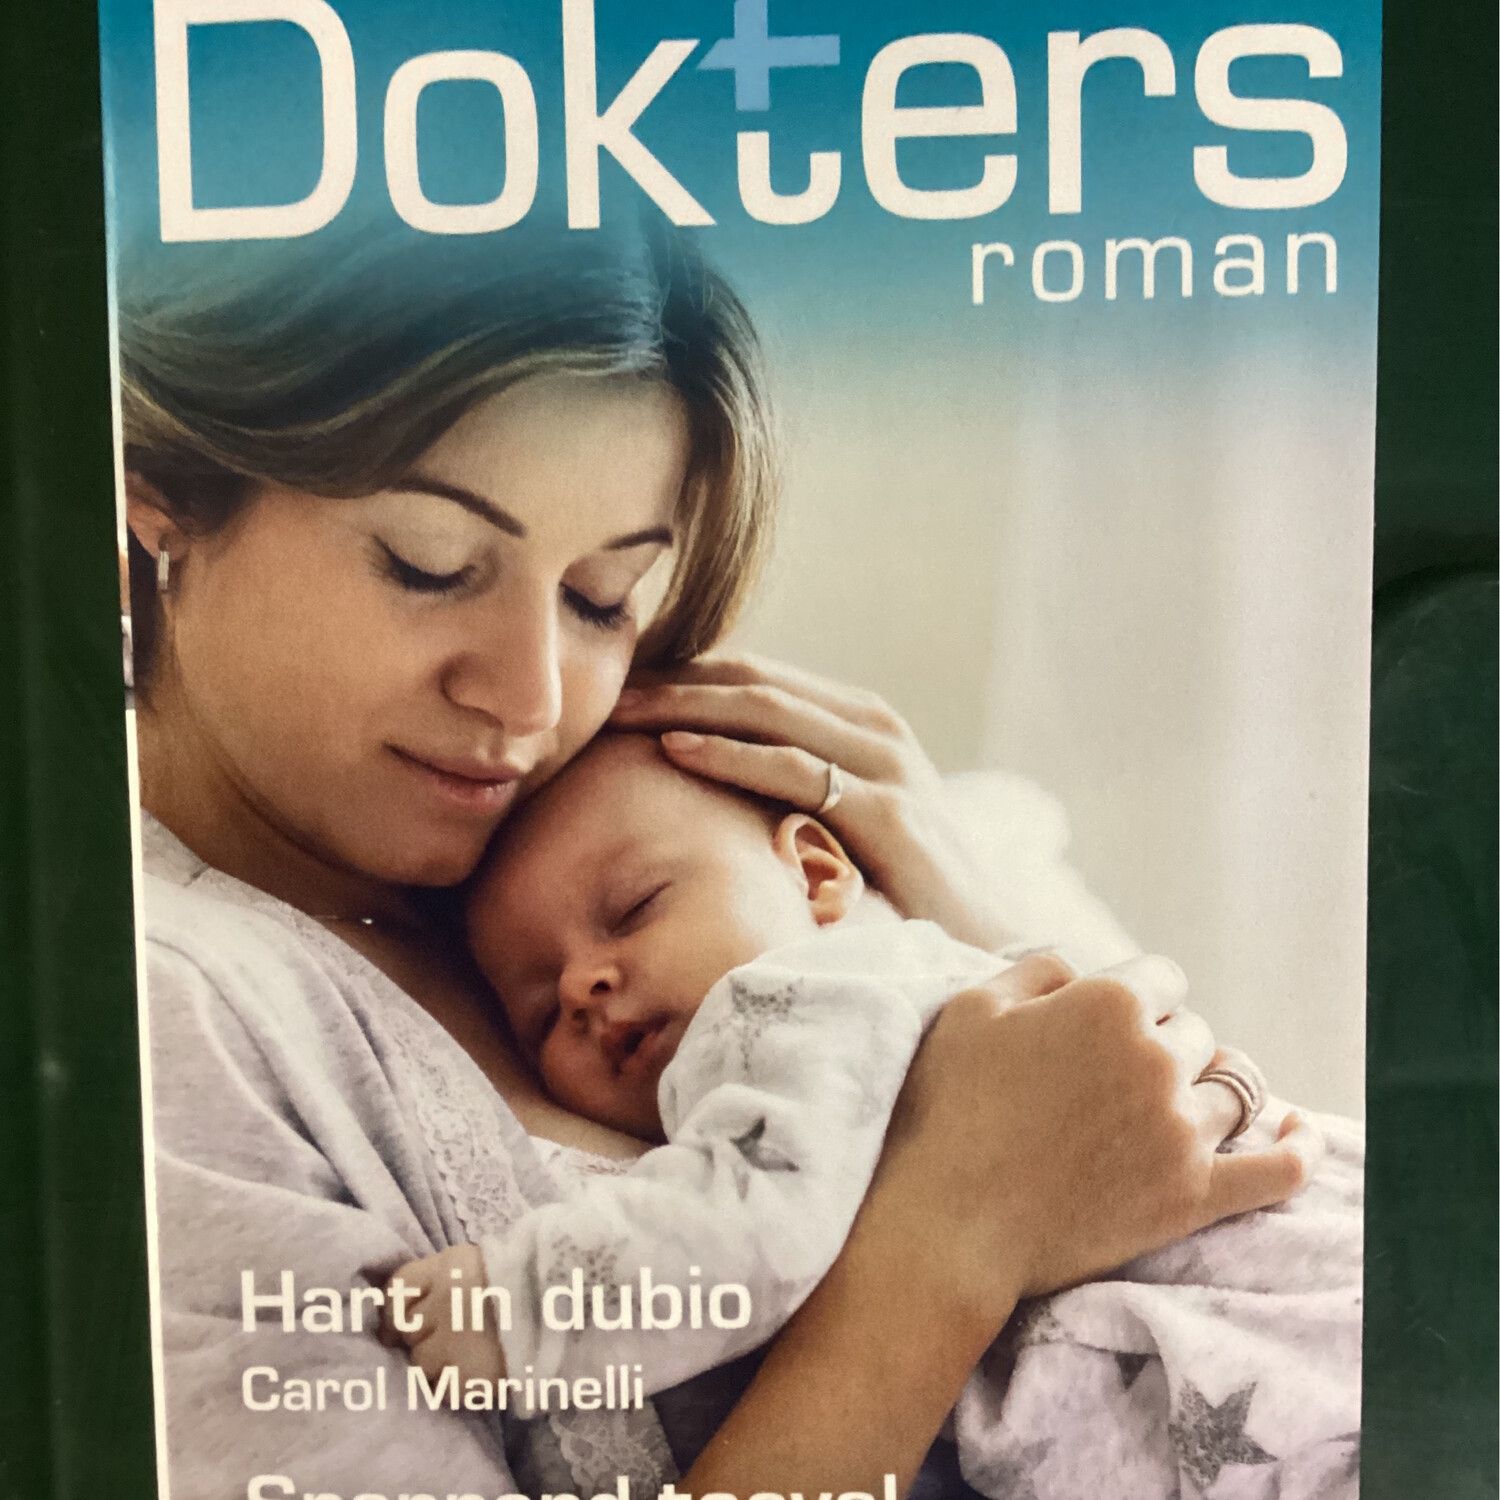 DOKTERS ROMAN EXTRA 193